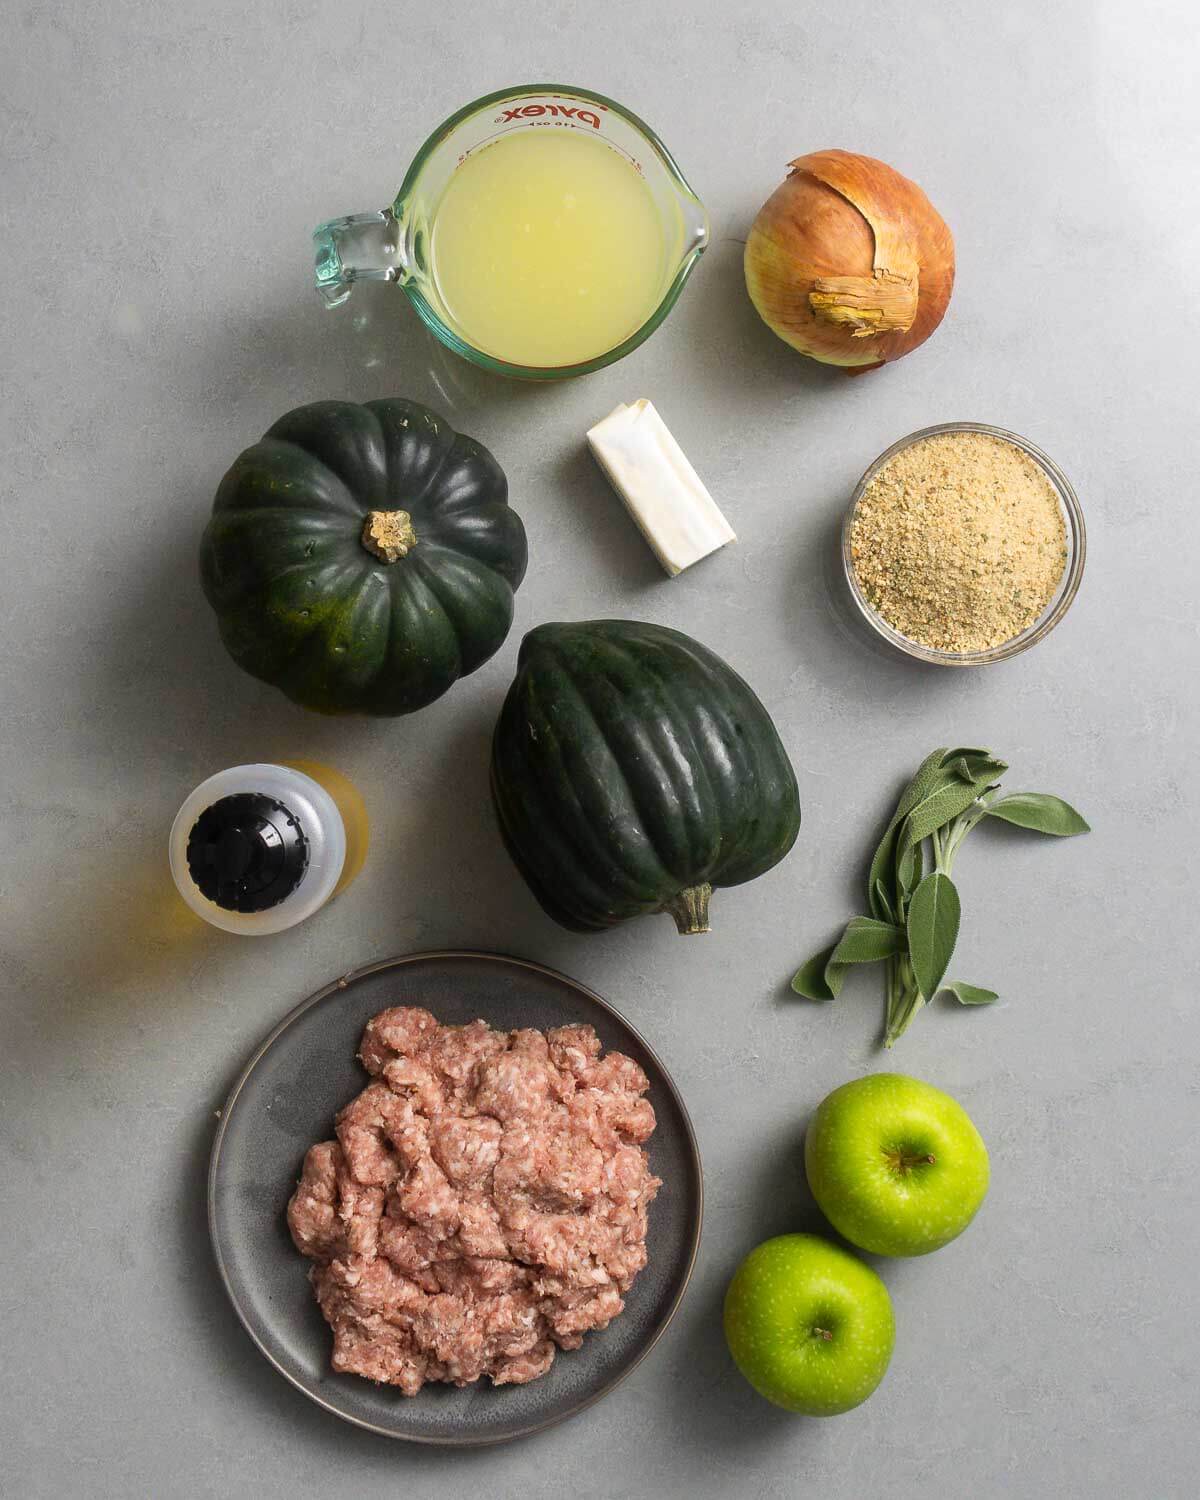 Ingredients shown: chicken stock, onion, acorn squash, butter, breadcrumbs, olive oil, sage, bulk Italian sausage, and apples.